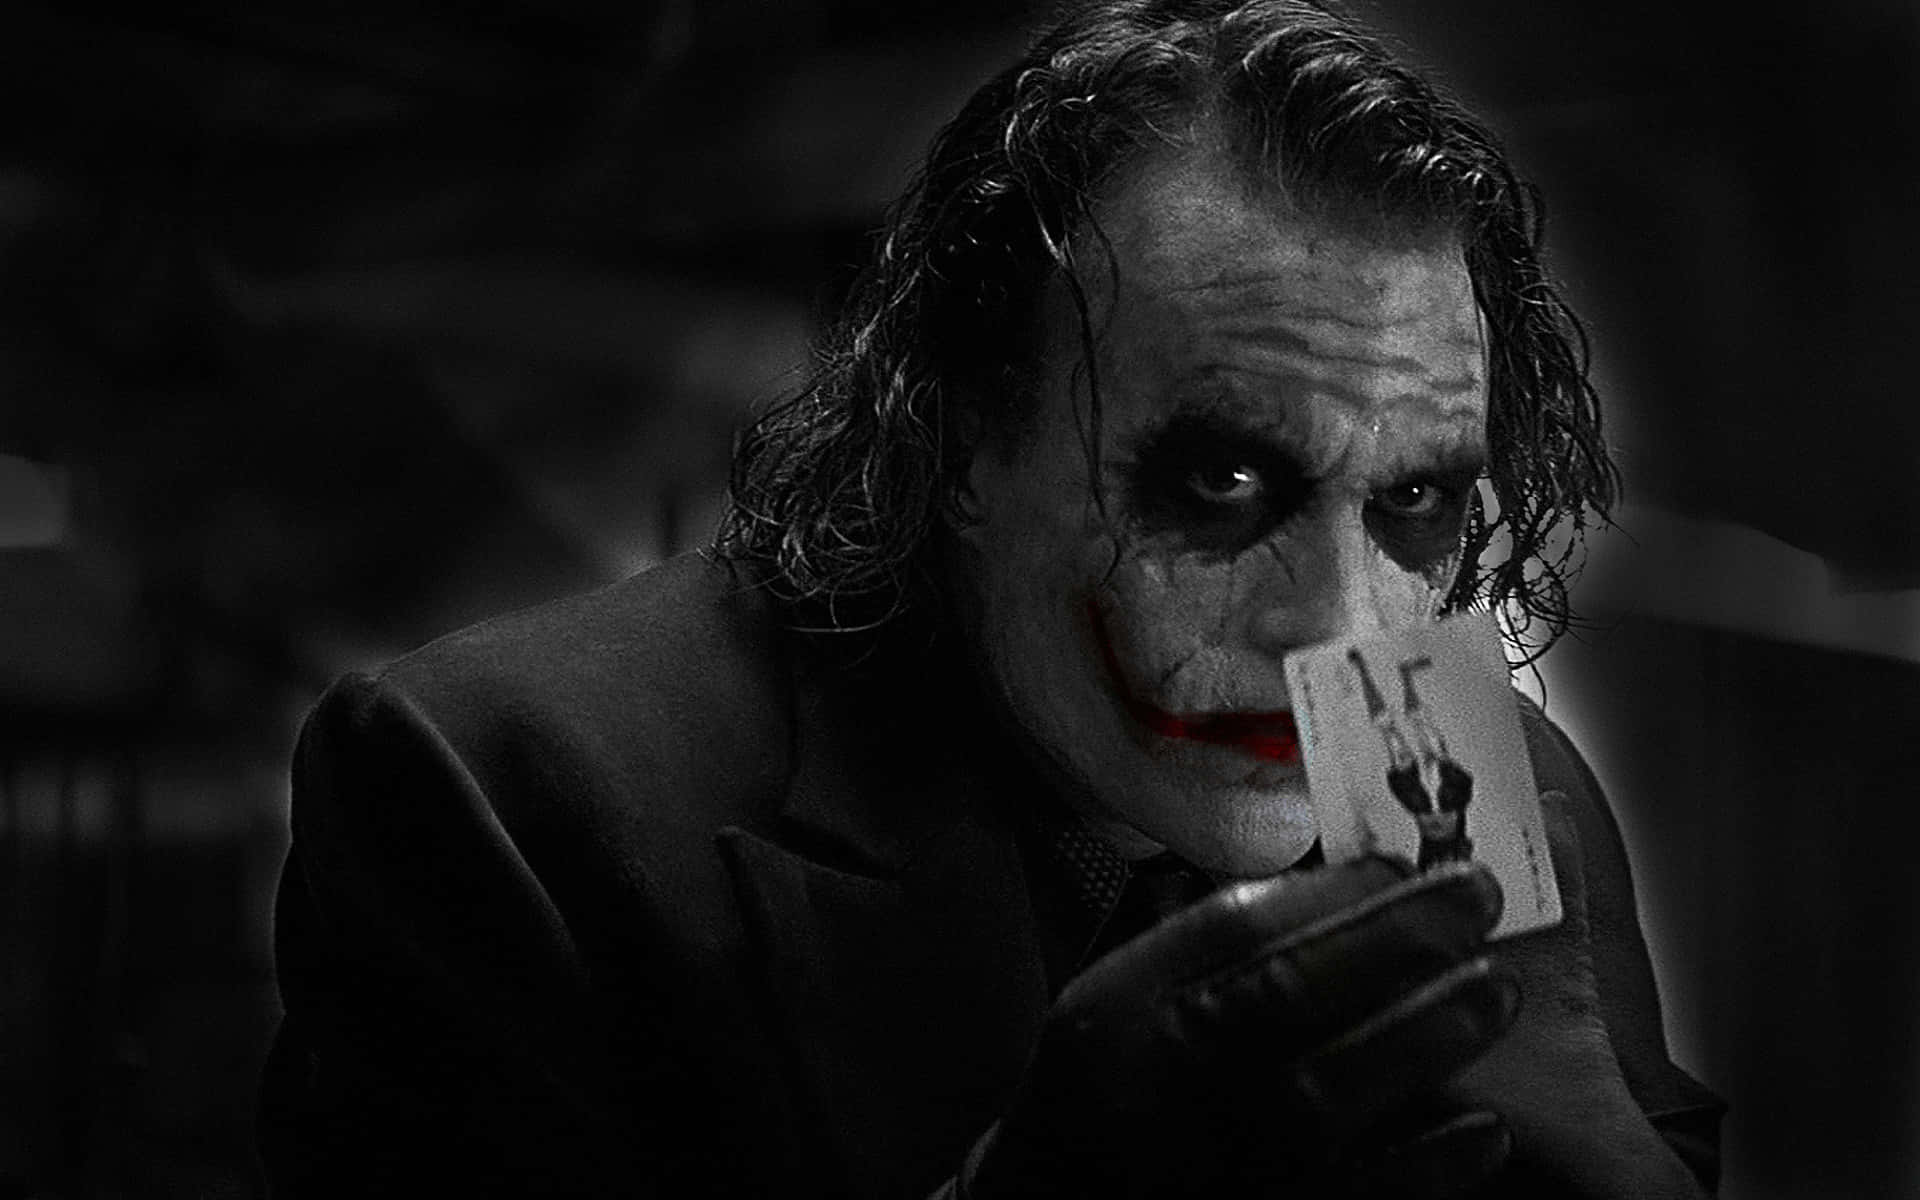 "Why so serious?" Wallpaper